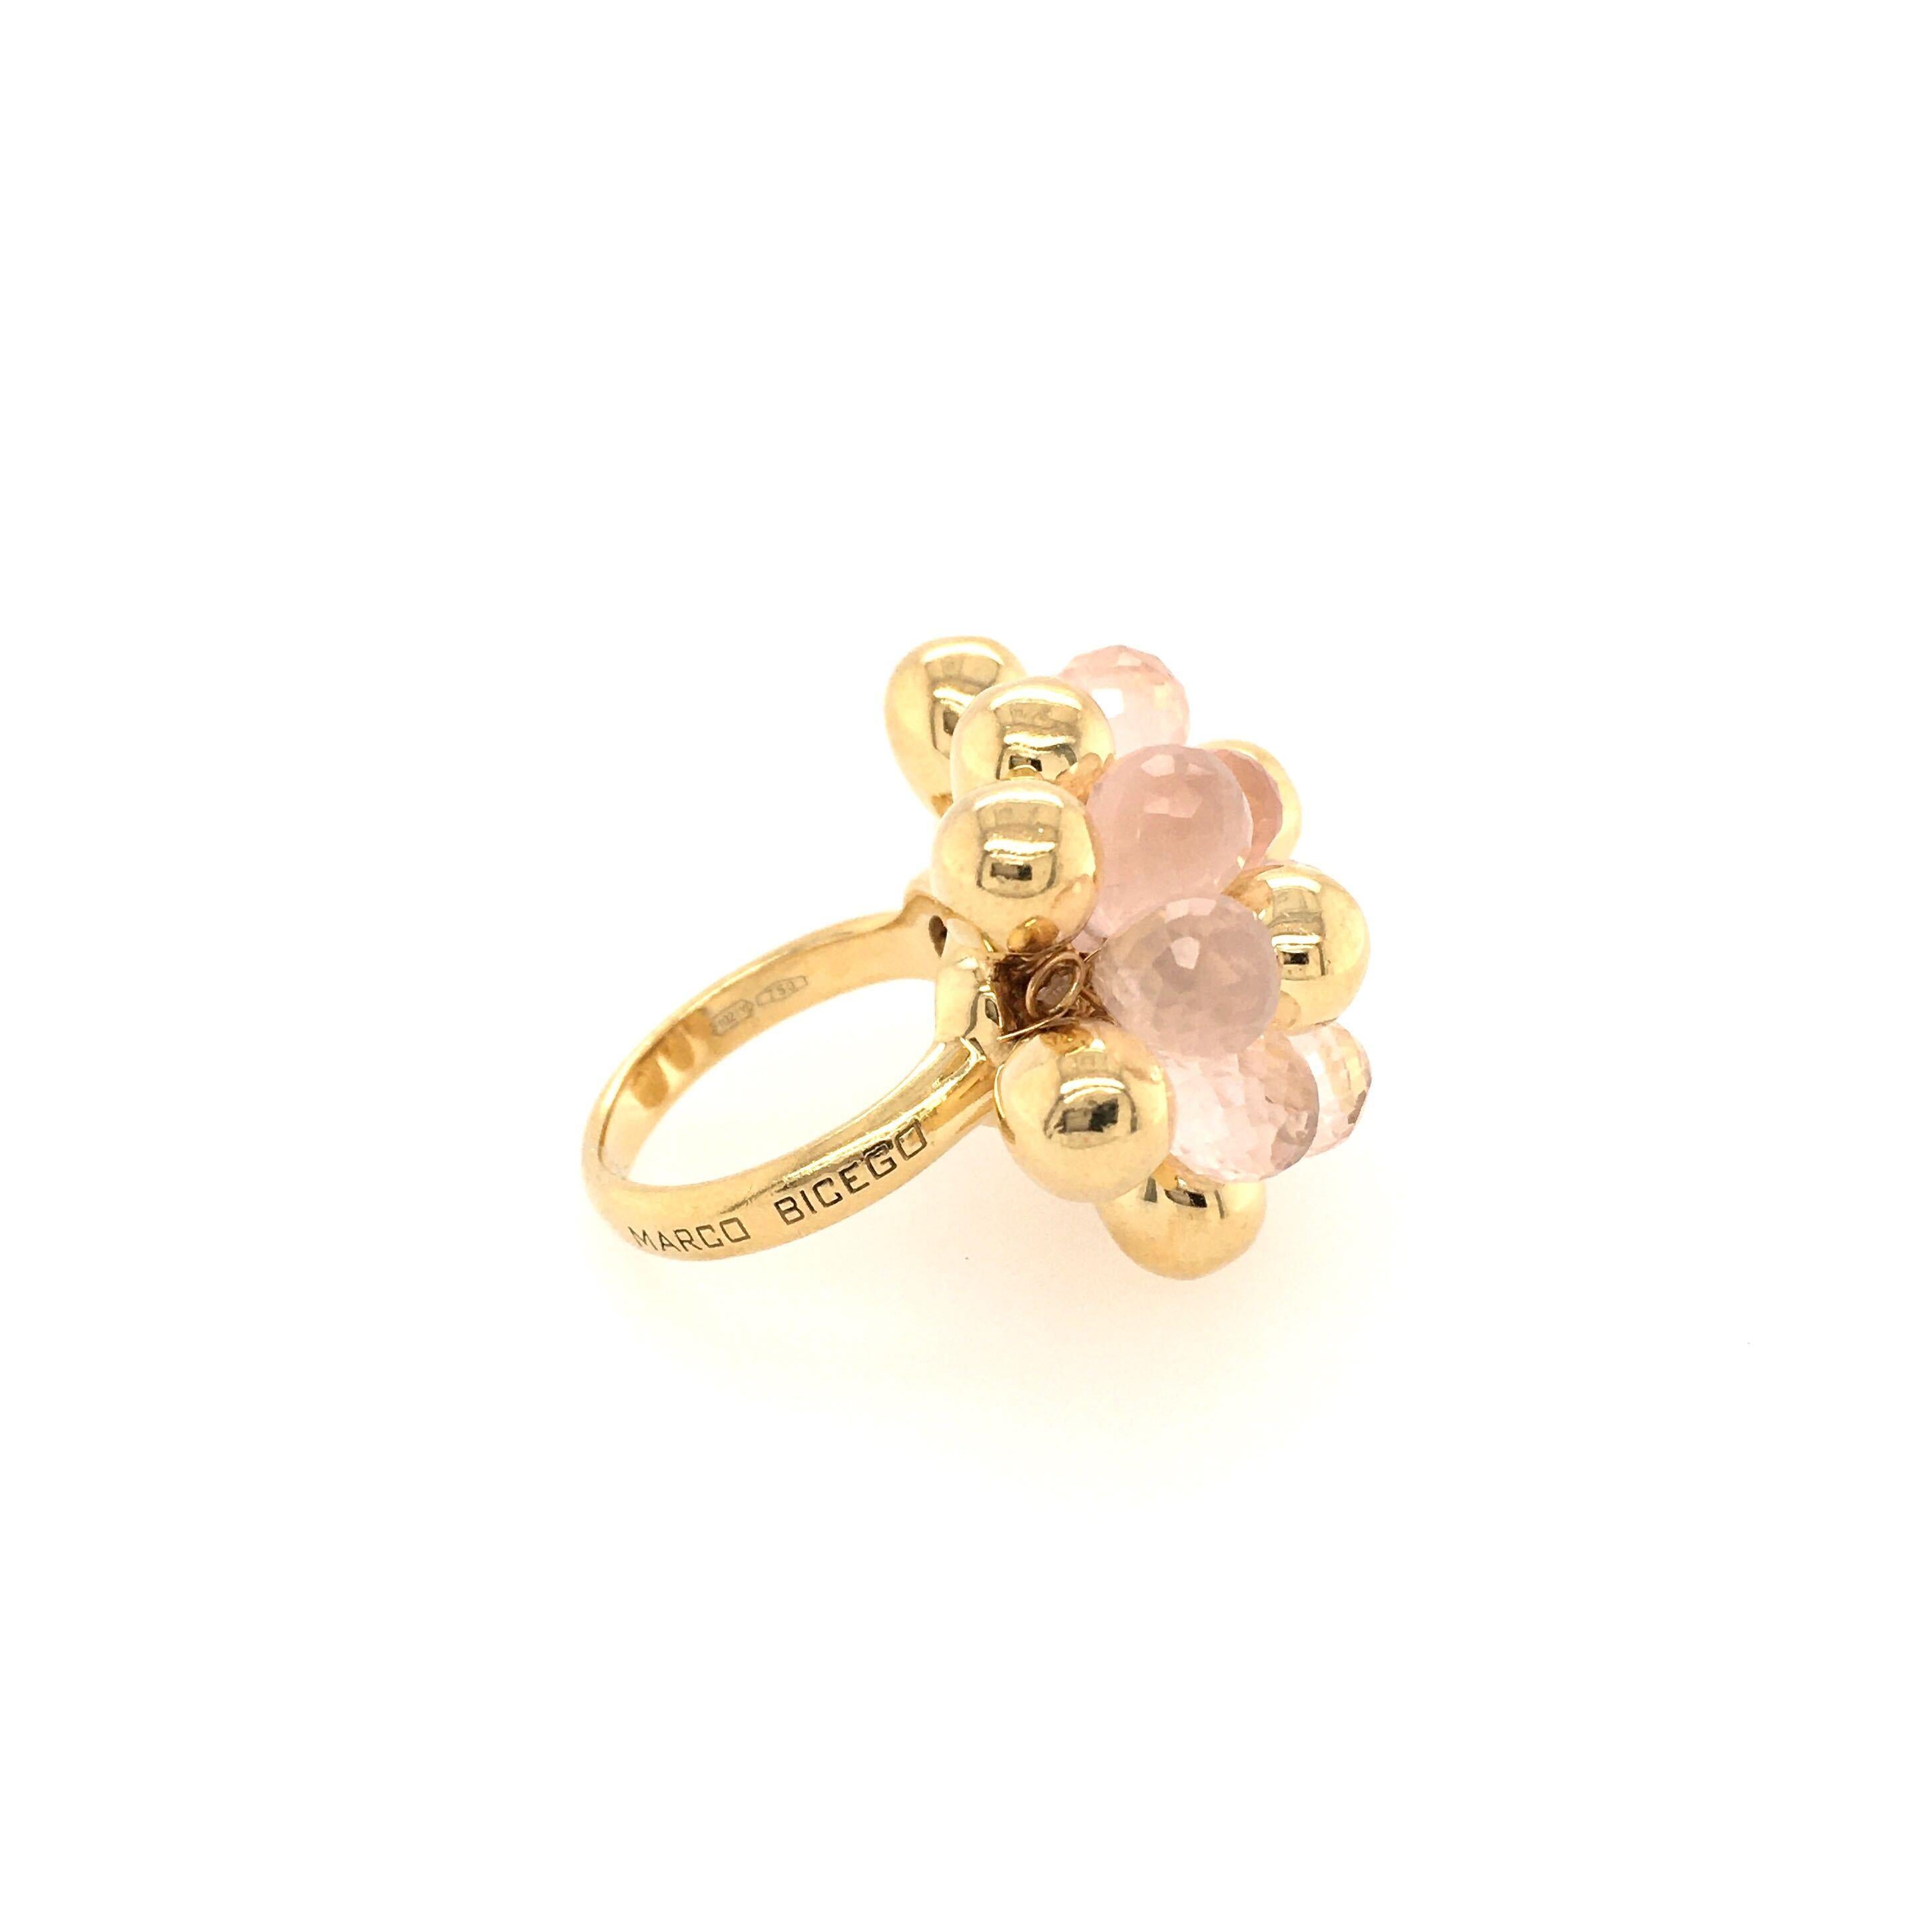 An 18 Karat yellow gold ring and rose quartz ring. Marco Bicego, from the Africa collection. Designed as a cluster, centering two (2) pale pink briolette flower heads, enanced by polished gold drops. Size 5 1/4, gross weight is approximately 12.7